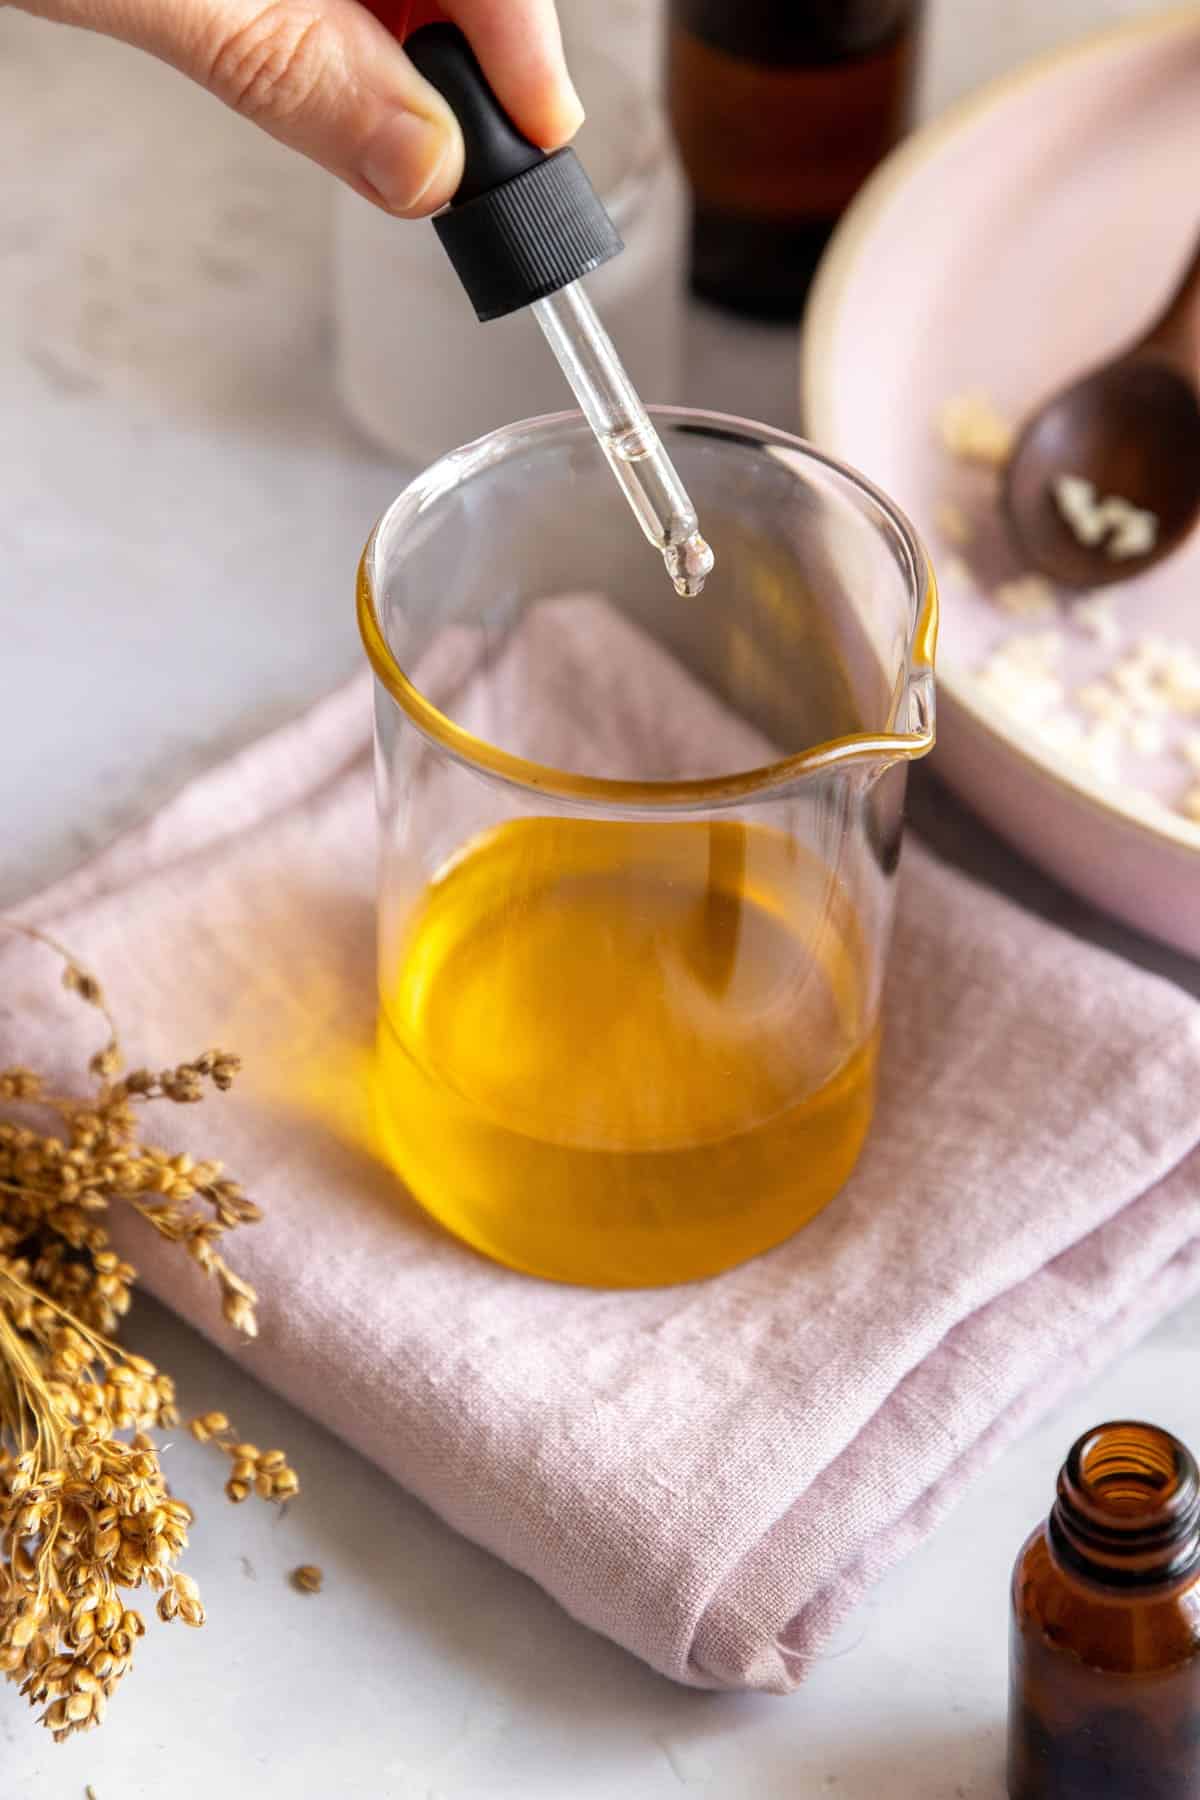 Add nail strenghtening essential oils to your DIY cuticle balm recipe